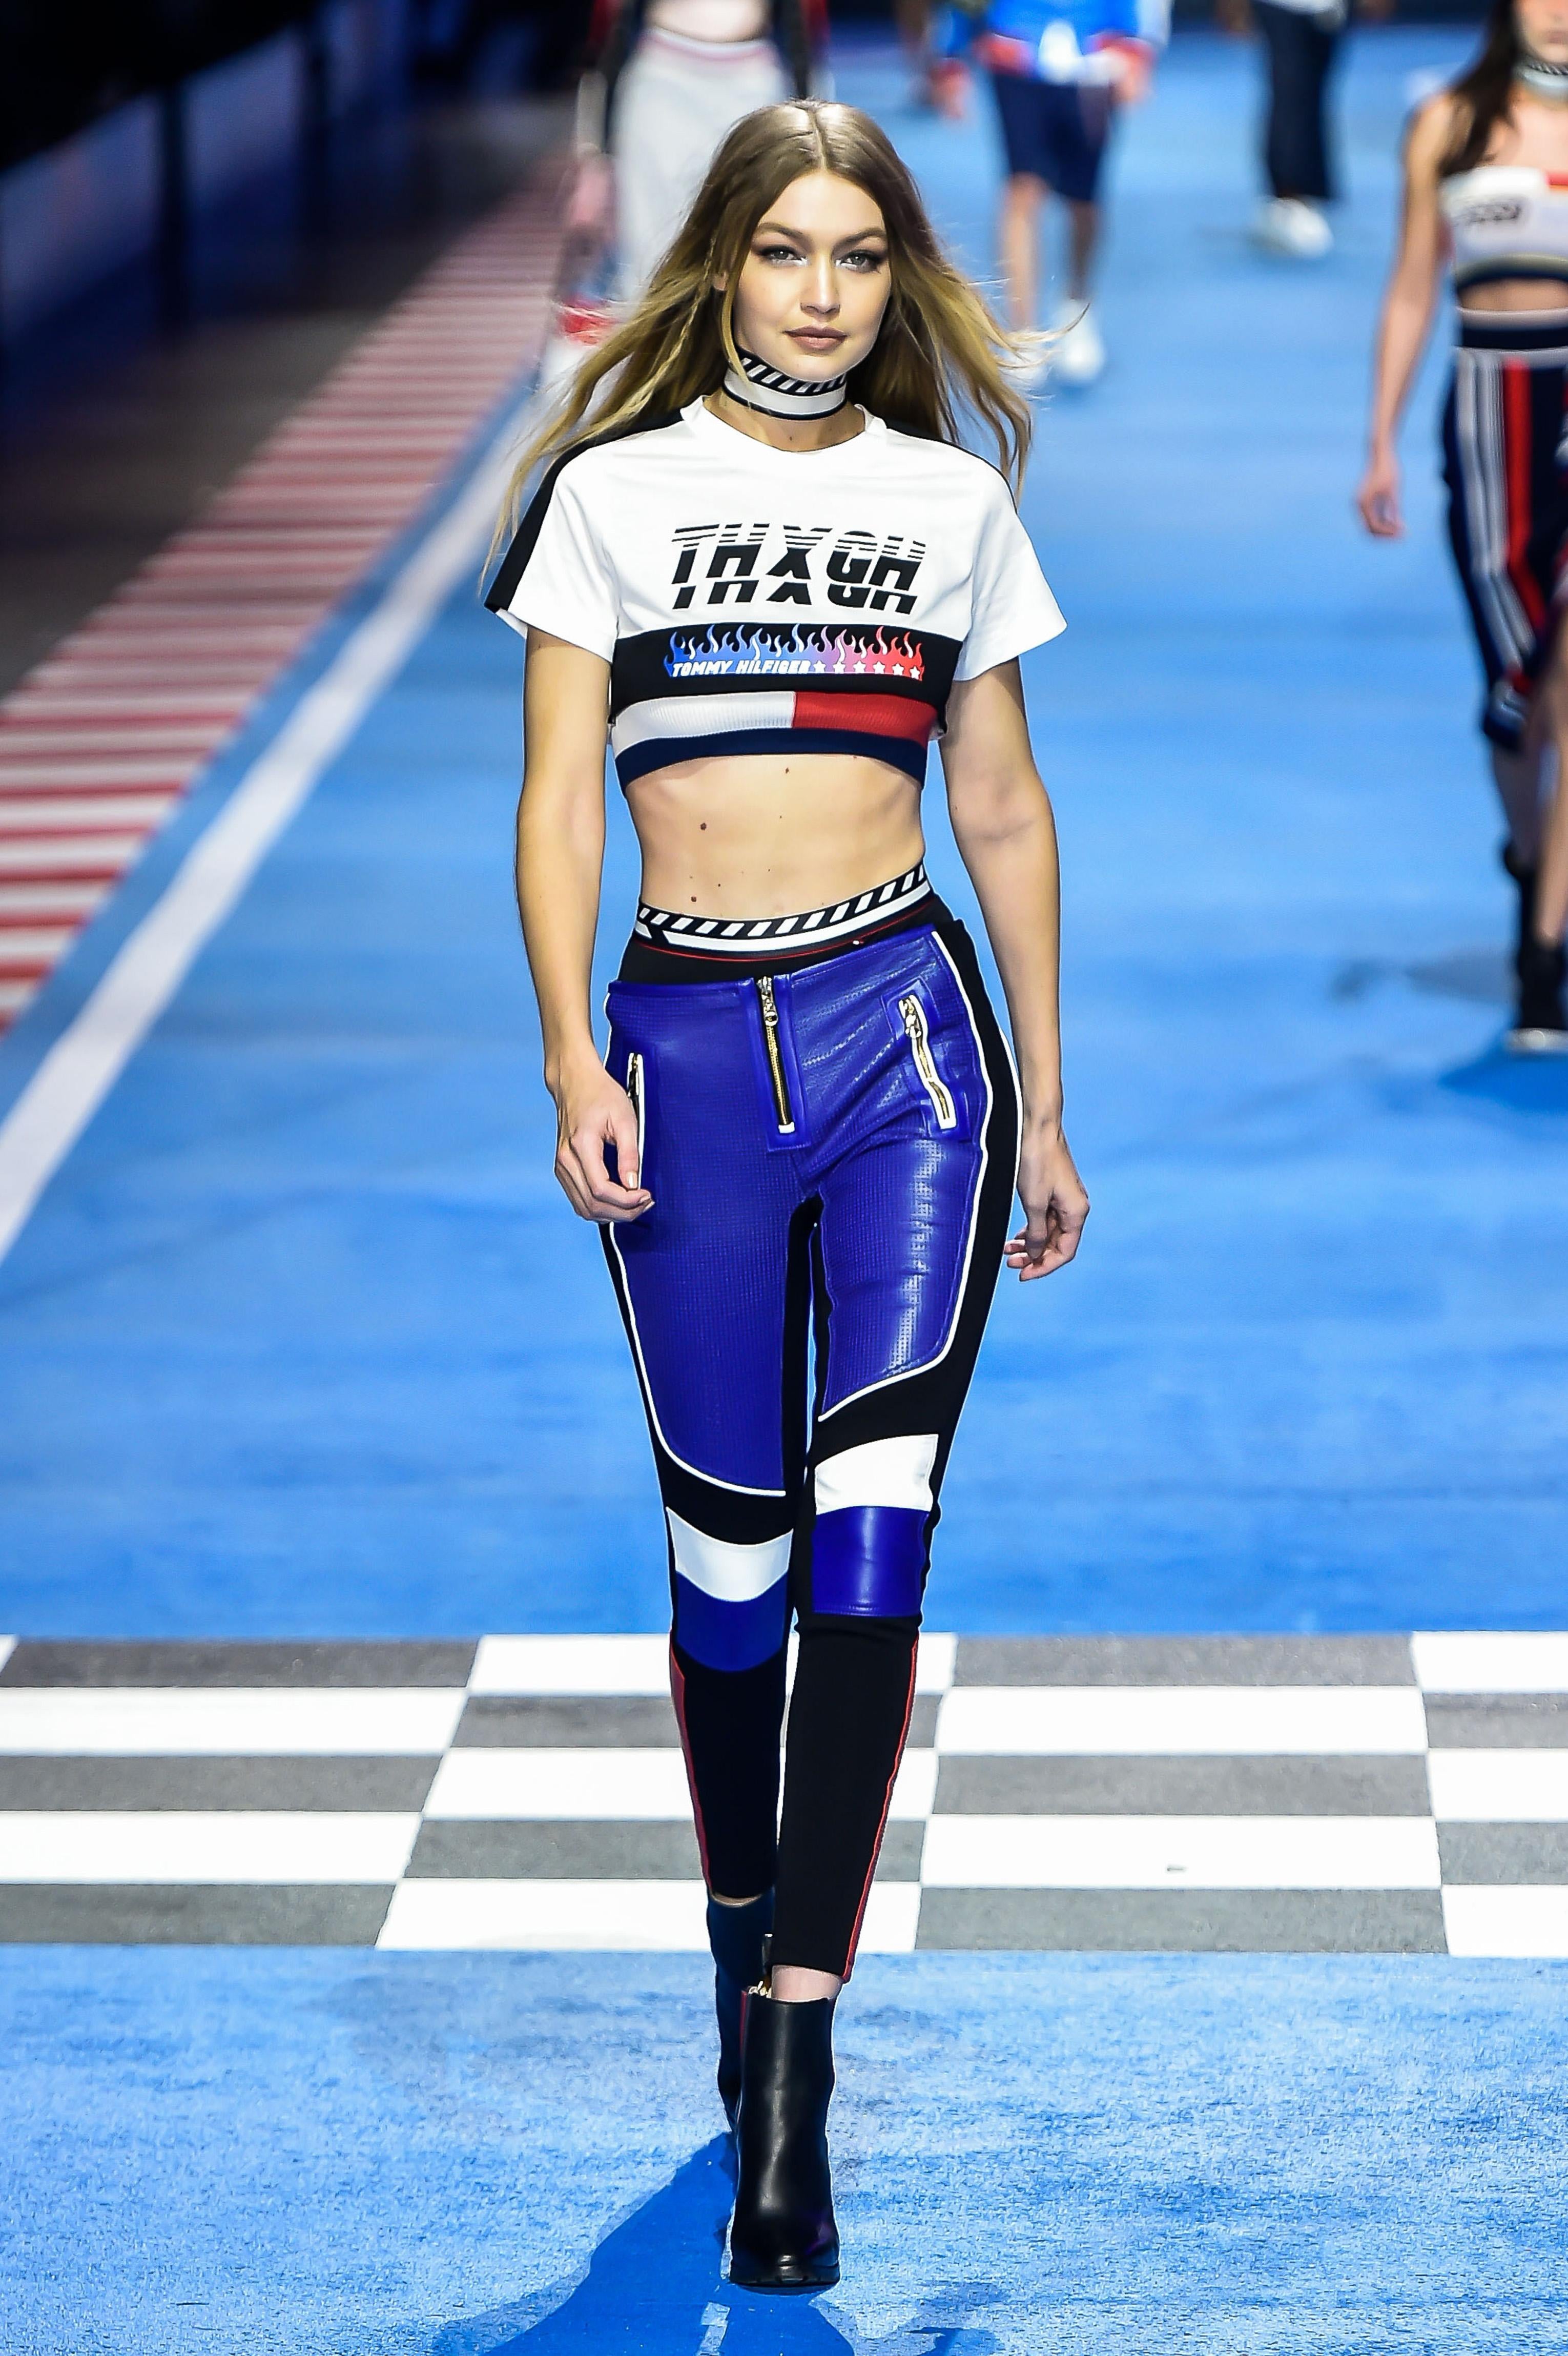 Tommy Hilfiger Tommy Graphic Legging - Bottoms 